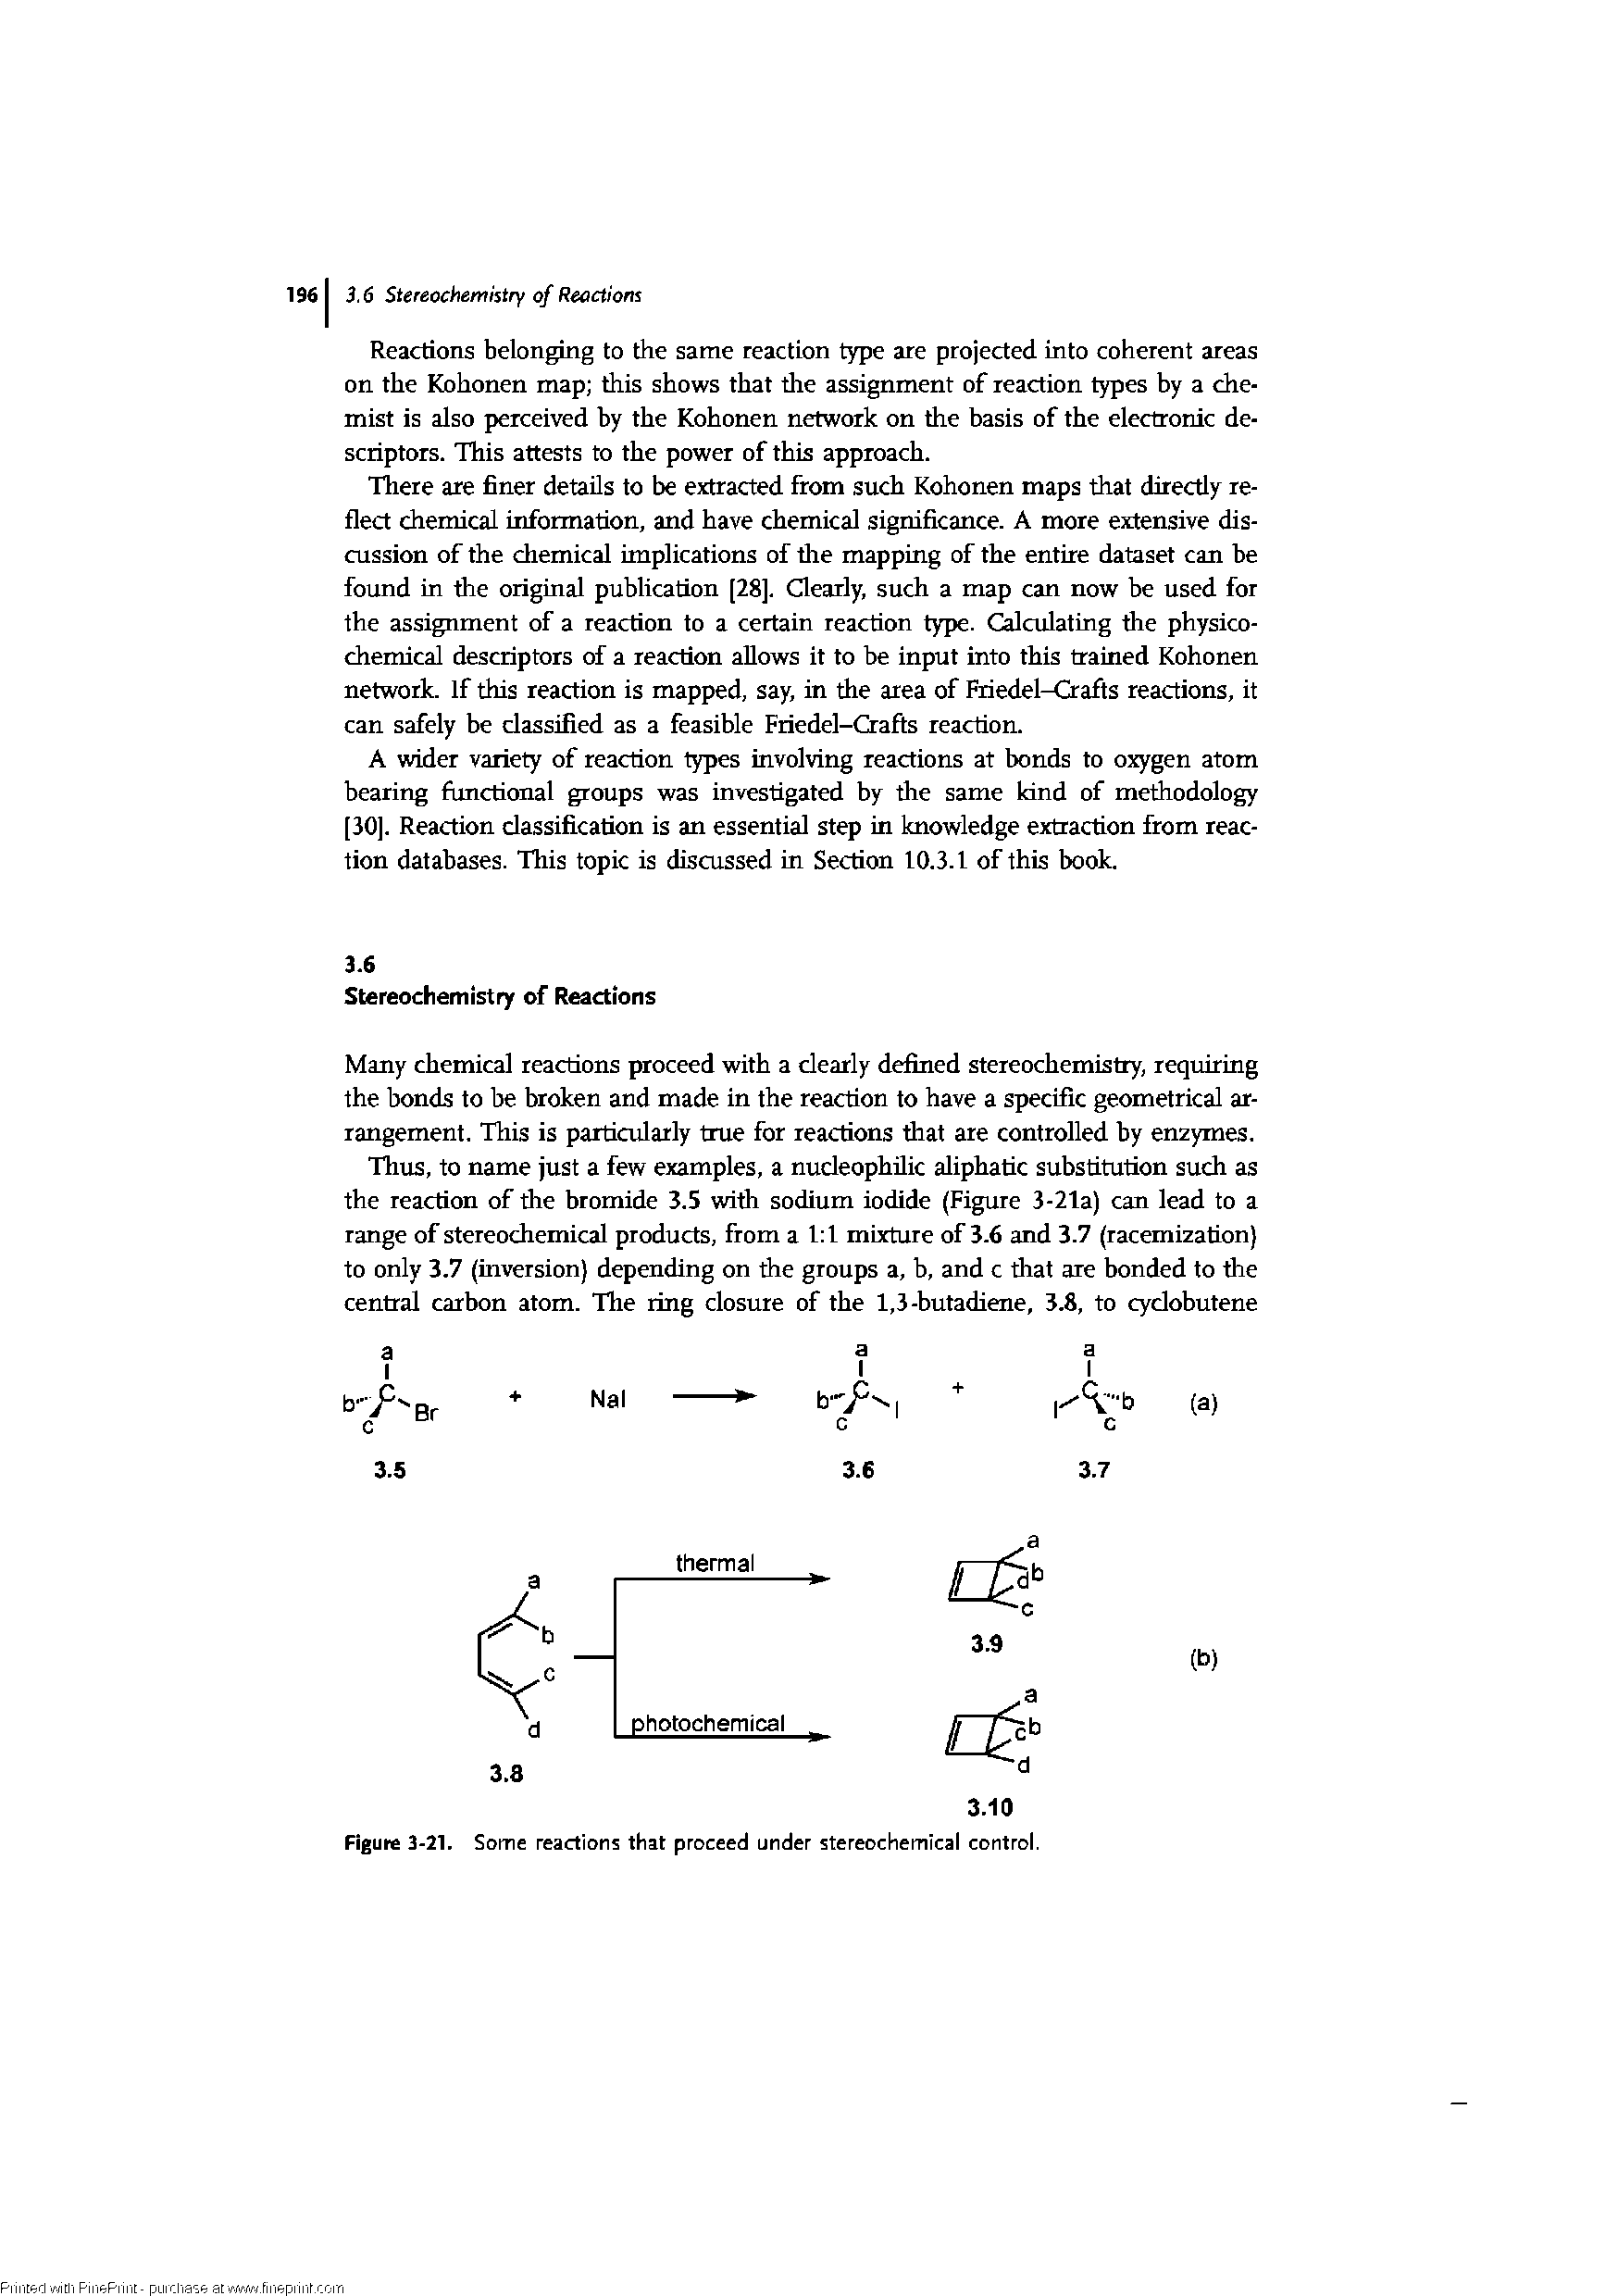 Figure 3-21. Some reactions that proceed under stereochemical control.